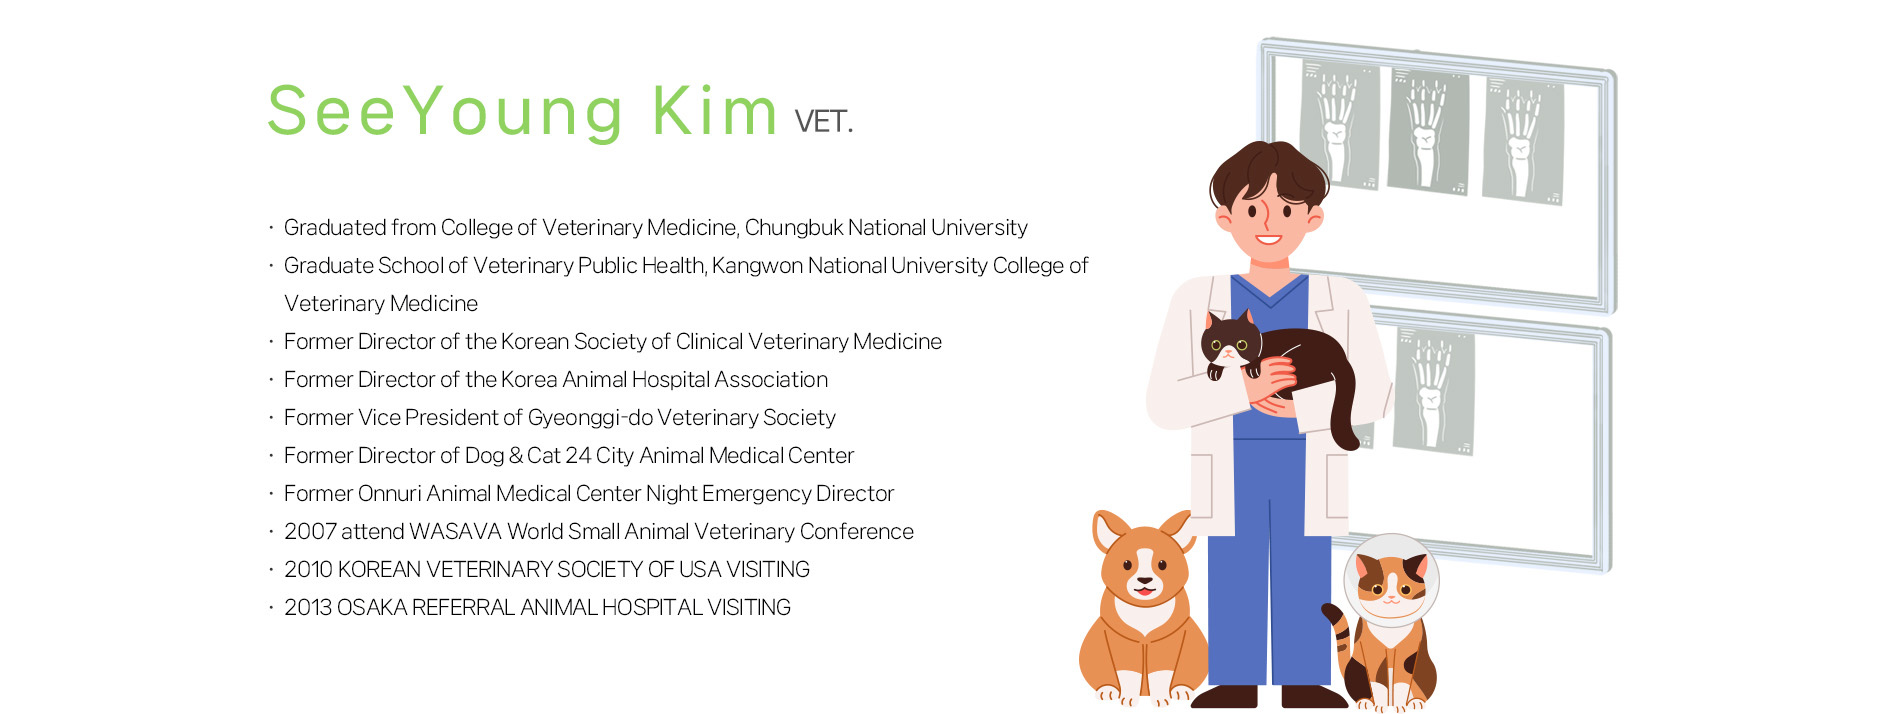 See Young Kim VET.